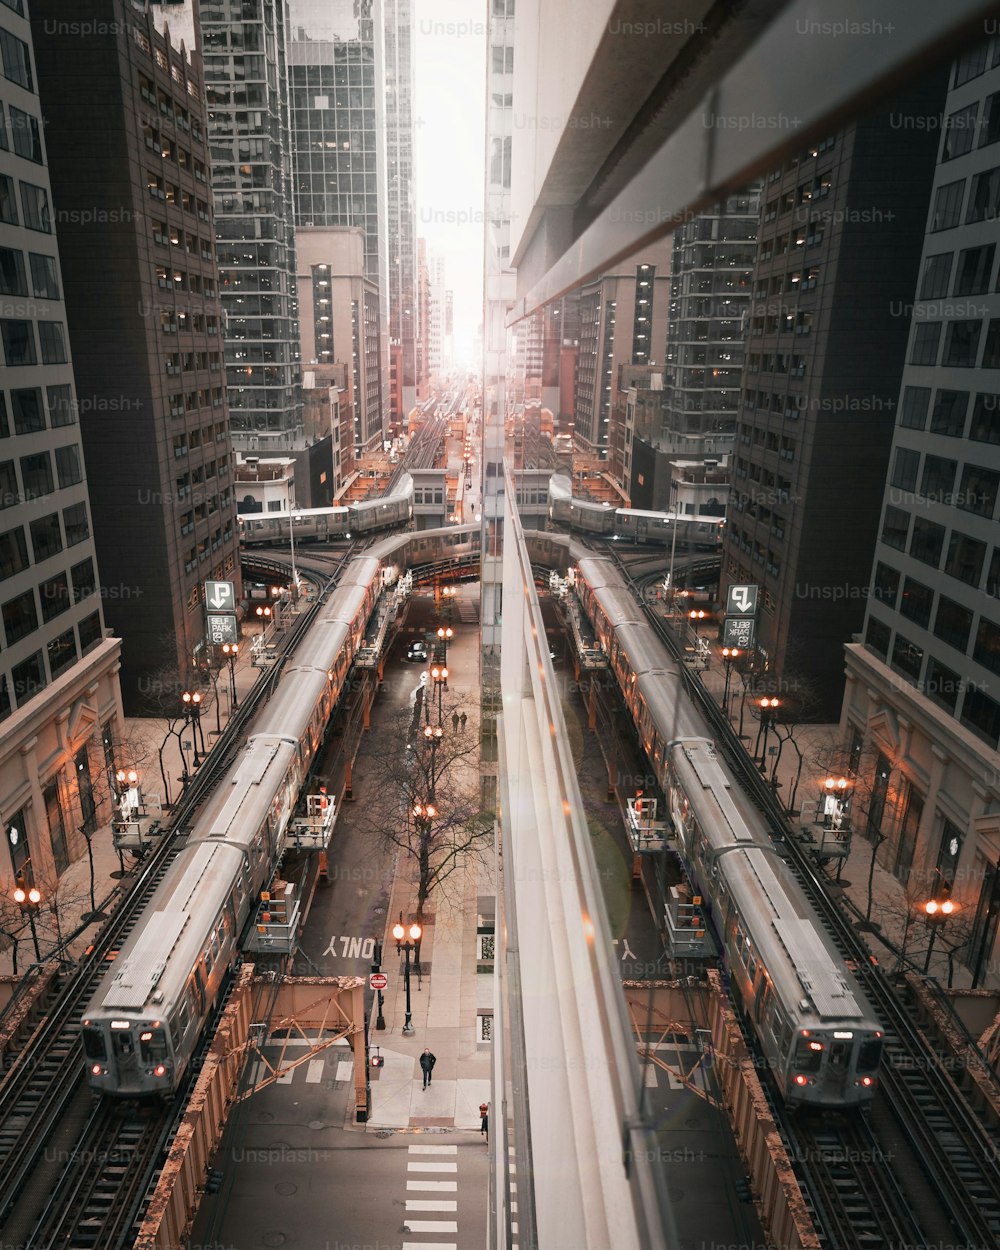 A vertical shot of a train symmetrically mirrored in the glass office building in Chicago, Illinois